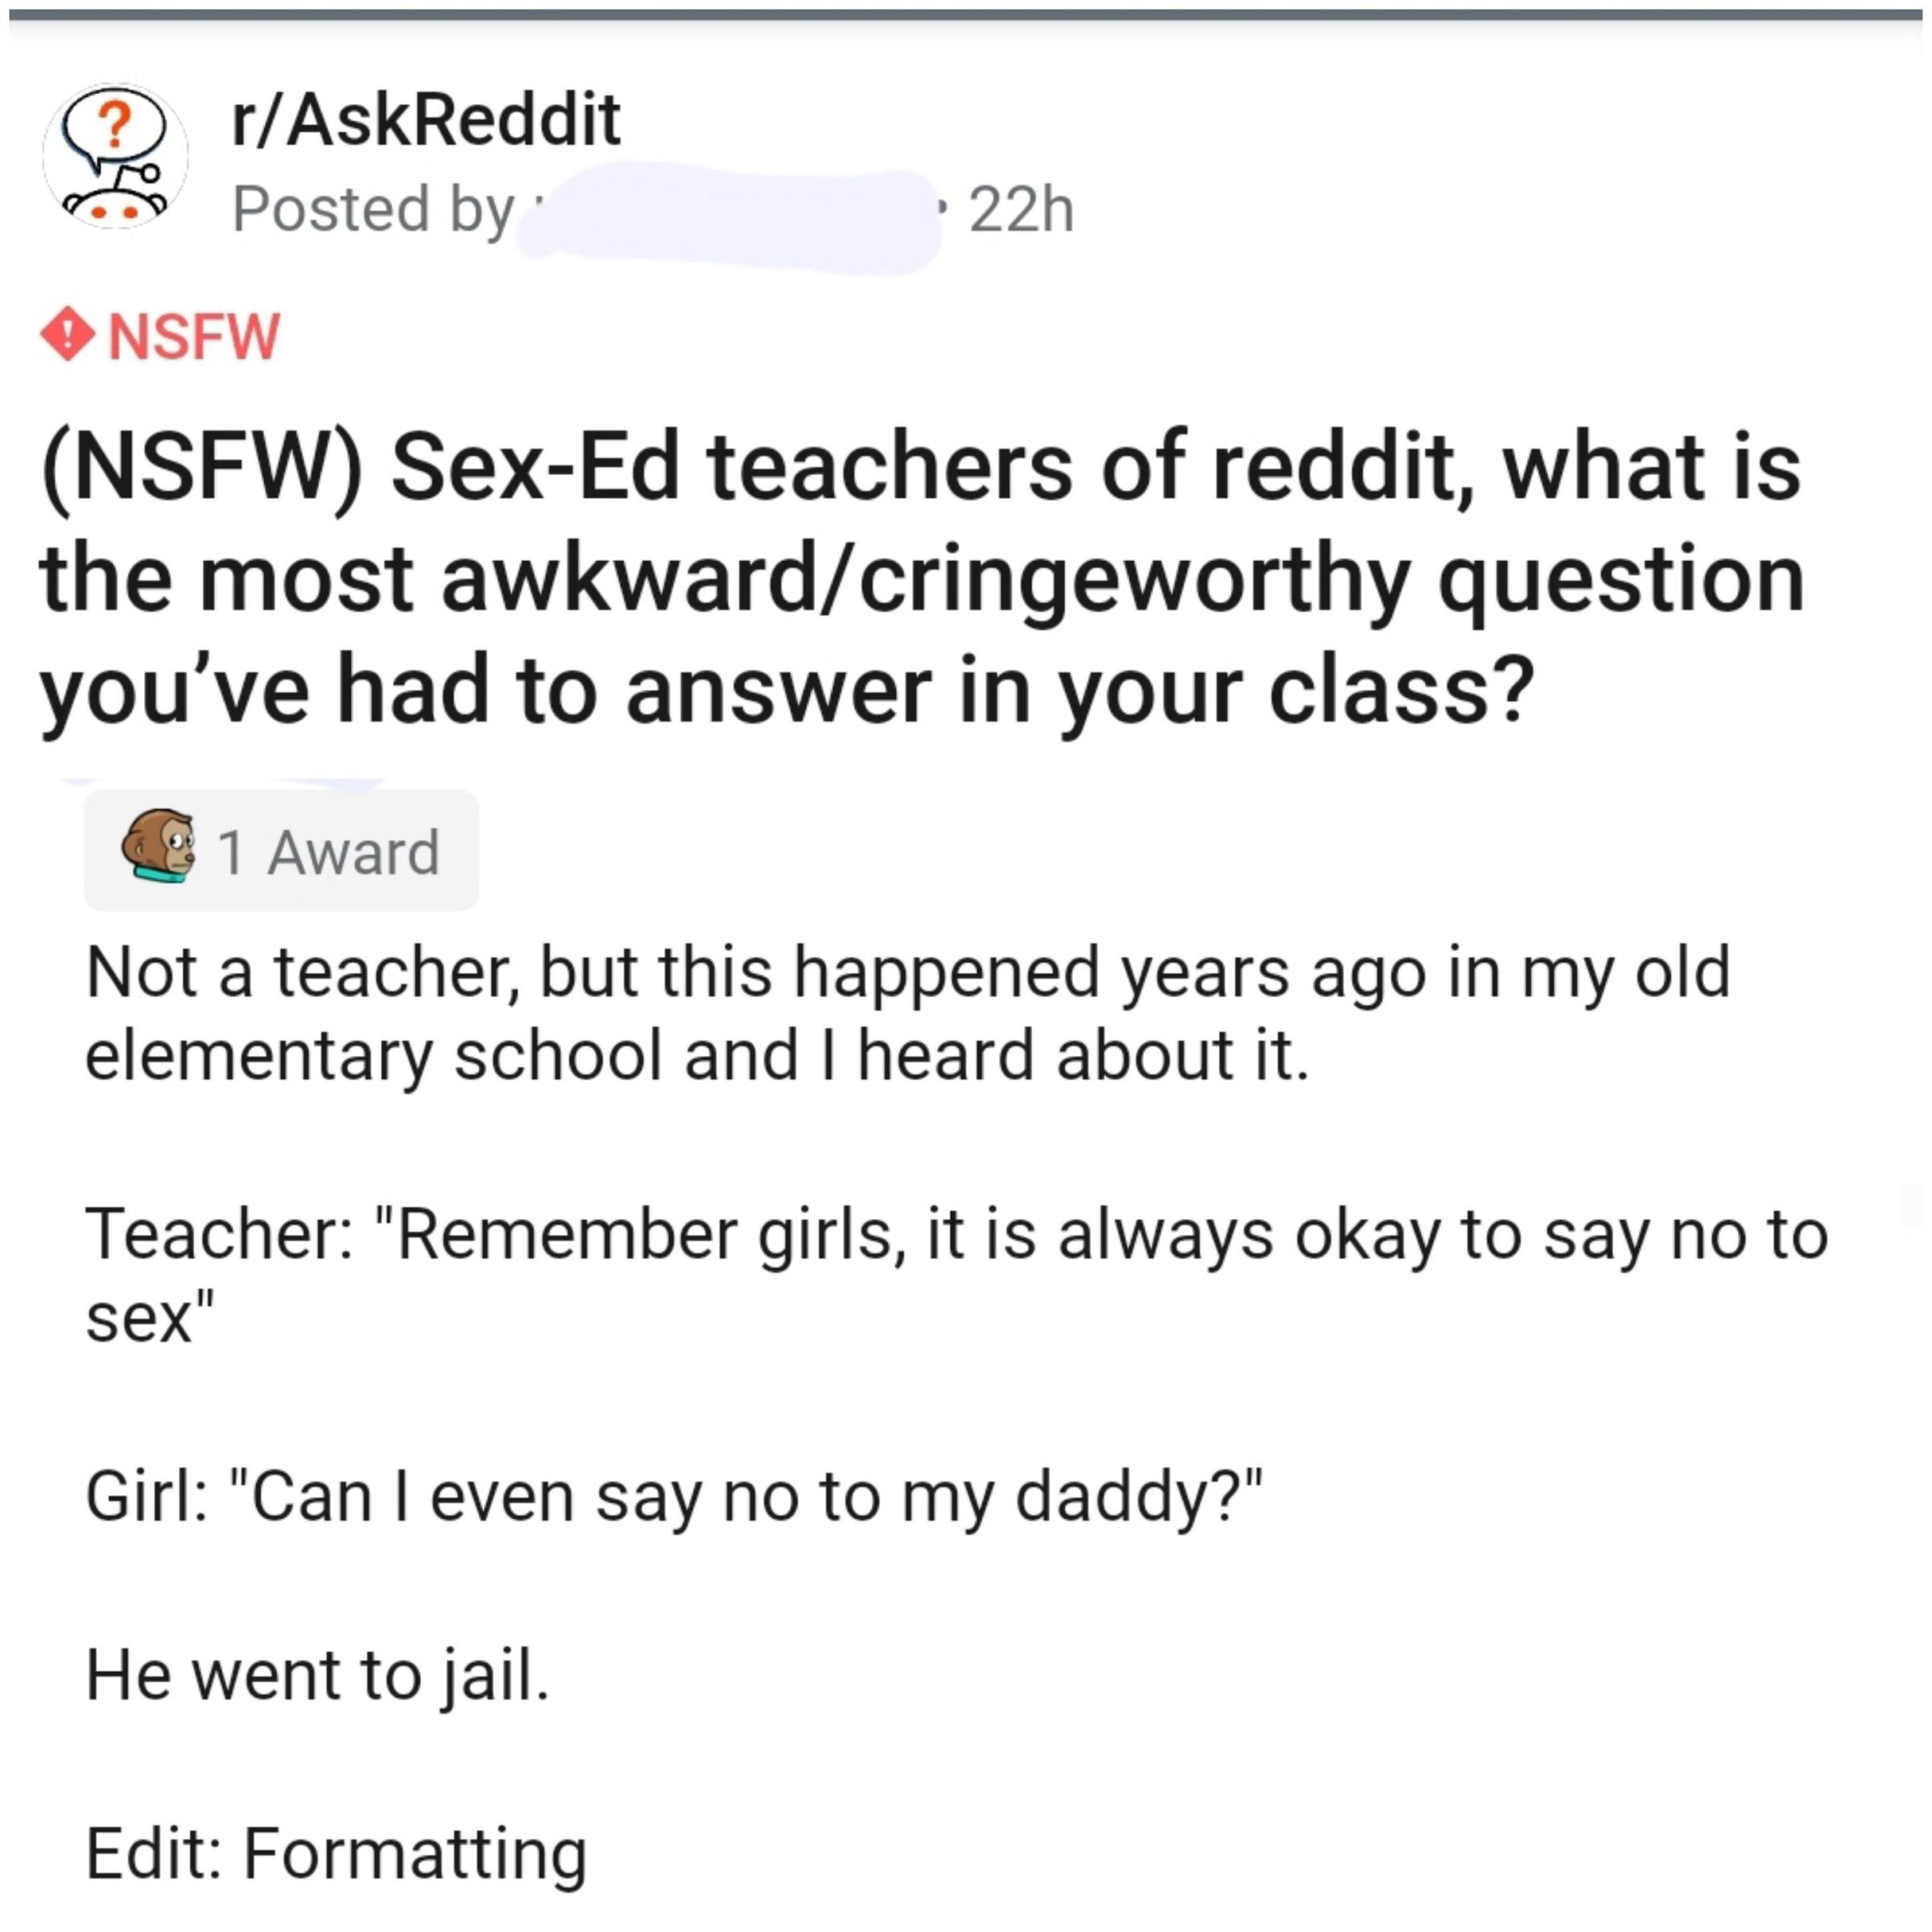 Hold up, Elementary, Wheel, Spin, HolUp, Brandon Dank Memes Hold up, Elementary, Wheel, Spin, HolUp, Brandon text: r/AskReddit Posted by O NSFW 22h (NSFW) Sex-Ed teachers of reddit, what is the most awkward/cringeworthy question you've had to answer in your class? C 1 Award Not a teacher, but this happened years ago in my old elementary school and I heard about it. Teacher: 